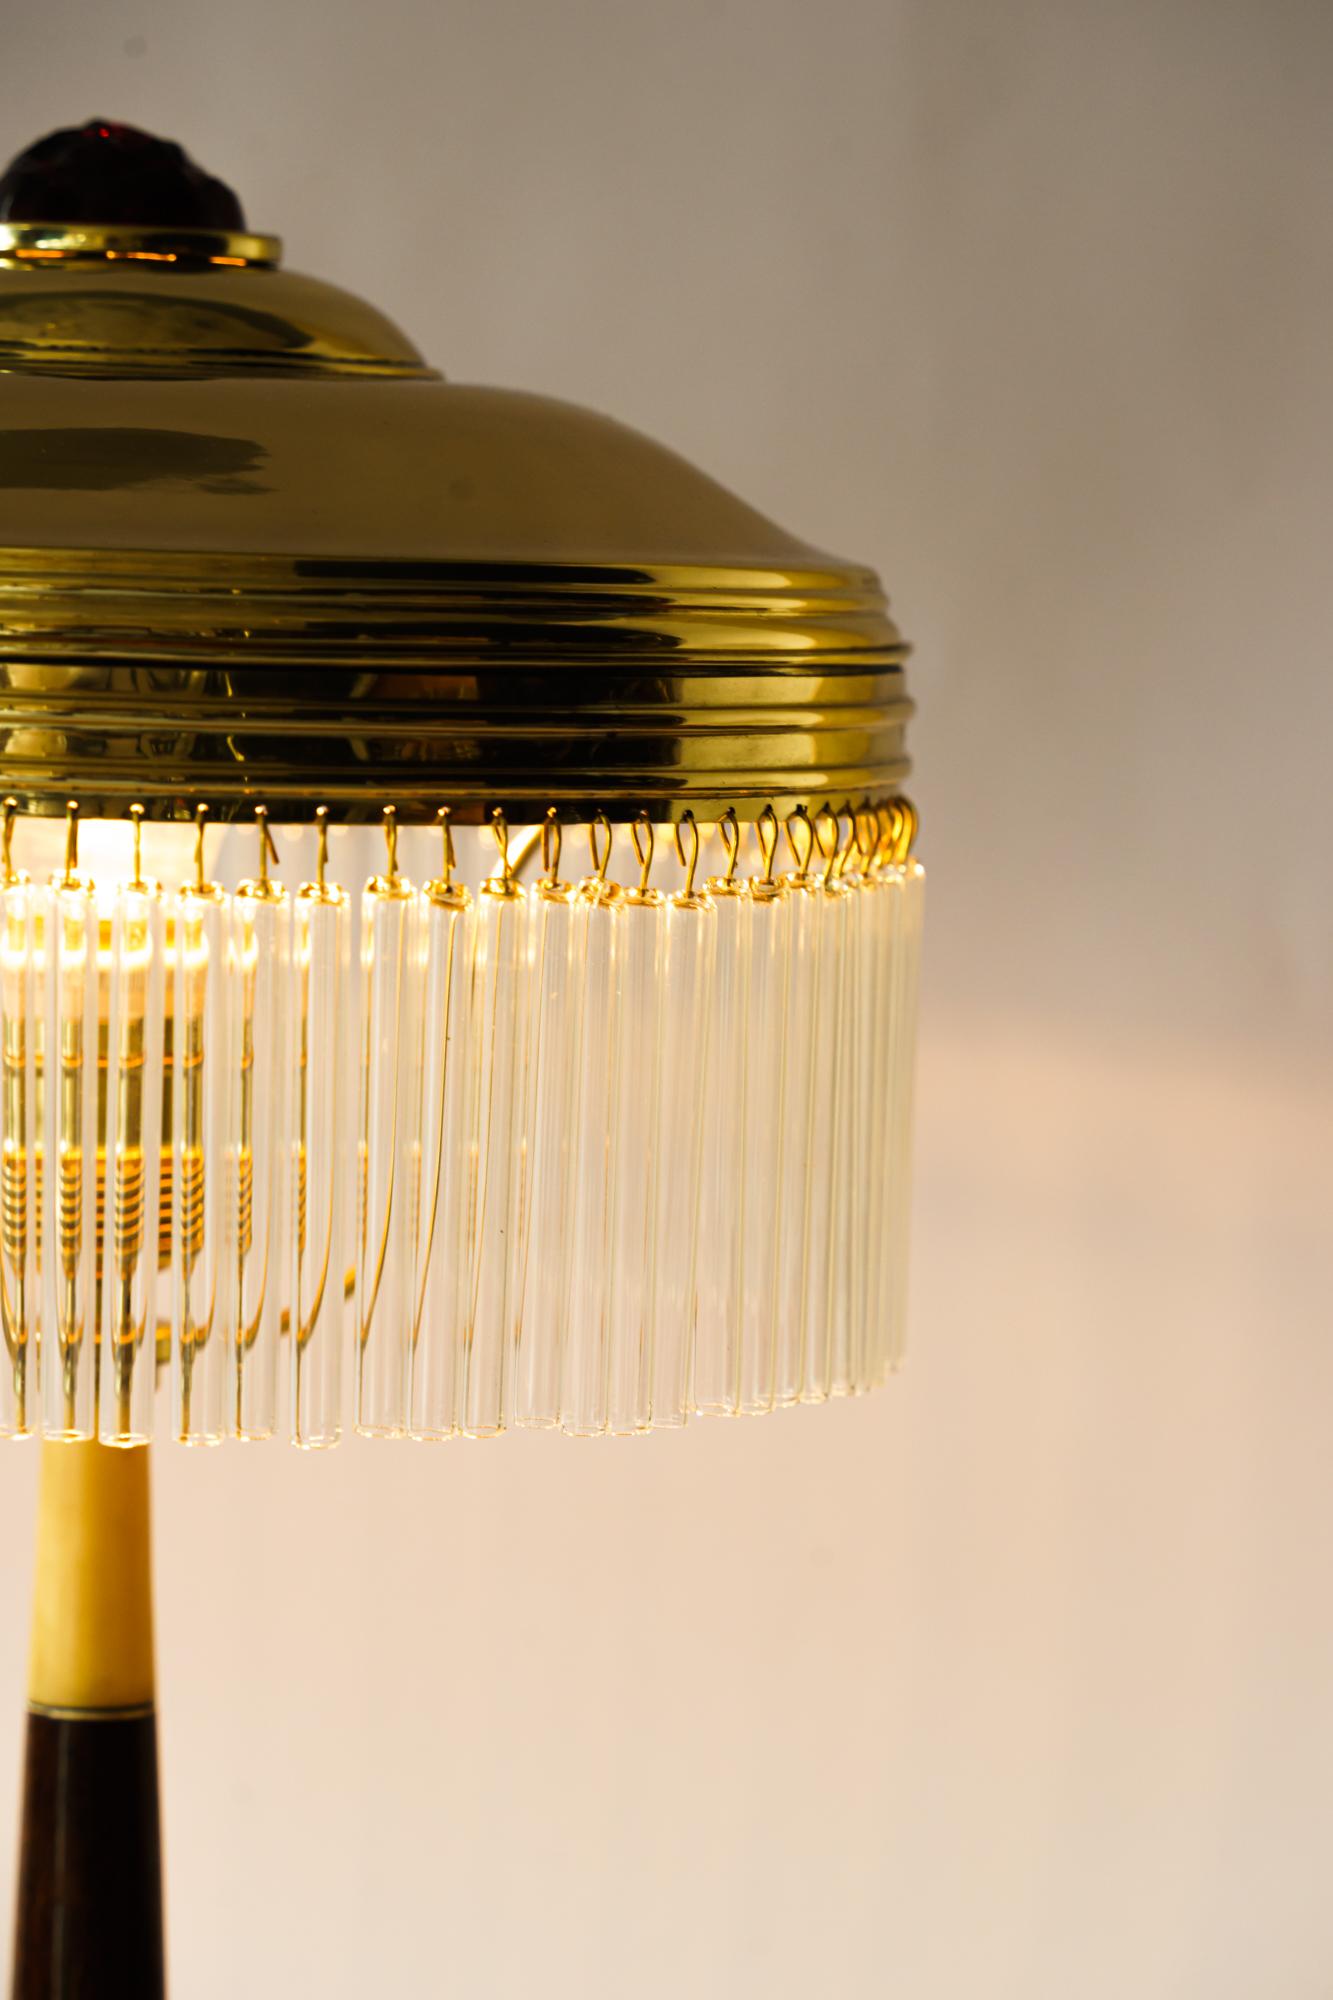 Brass Rare Art Deco Table Lamp with Glass Sticks, Vienna, Around 1920s For Sale